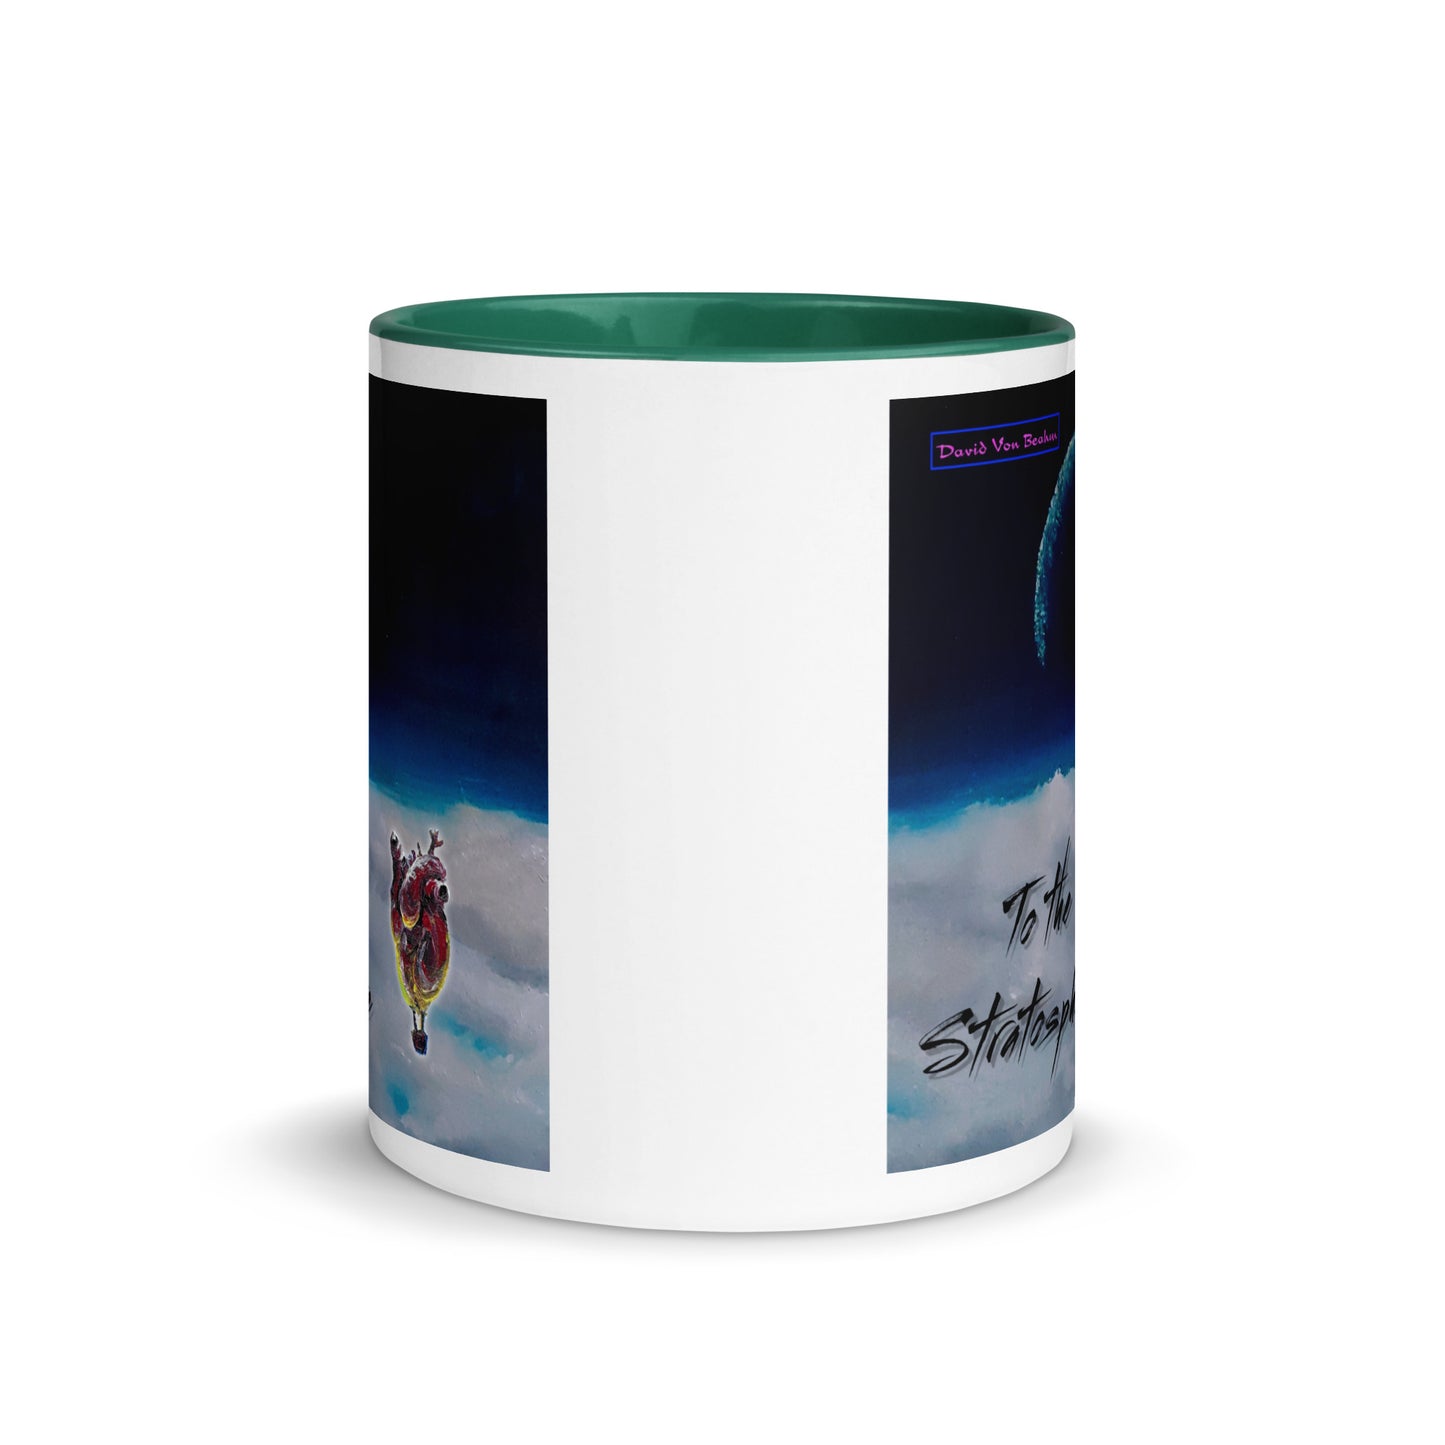 David Von Beahm - To The Stratosphere Mug With Color Inside